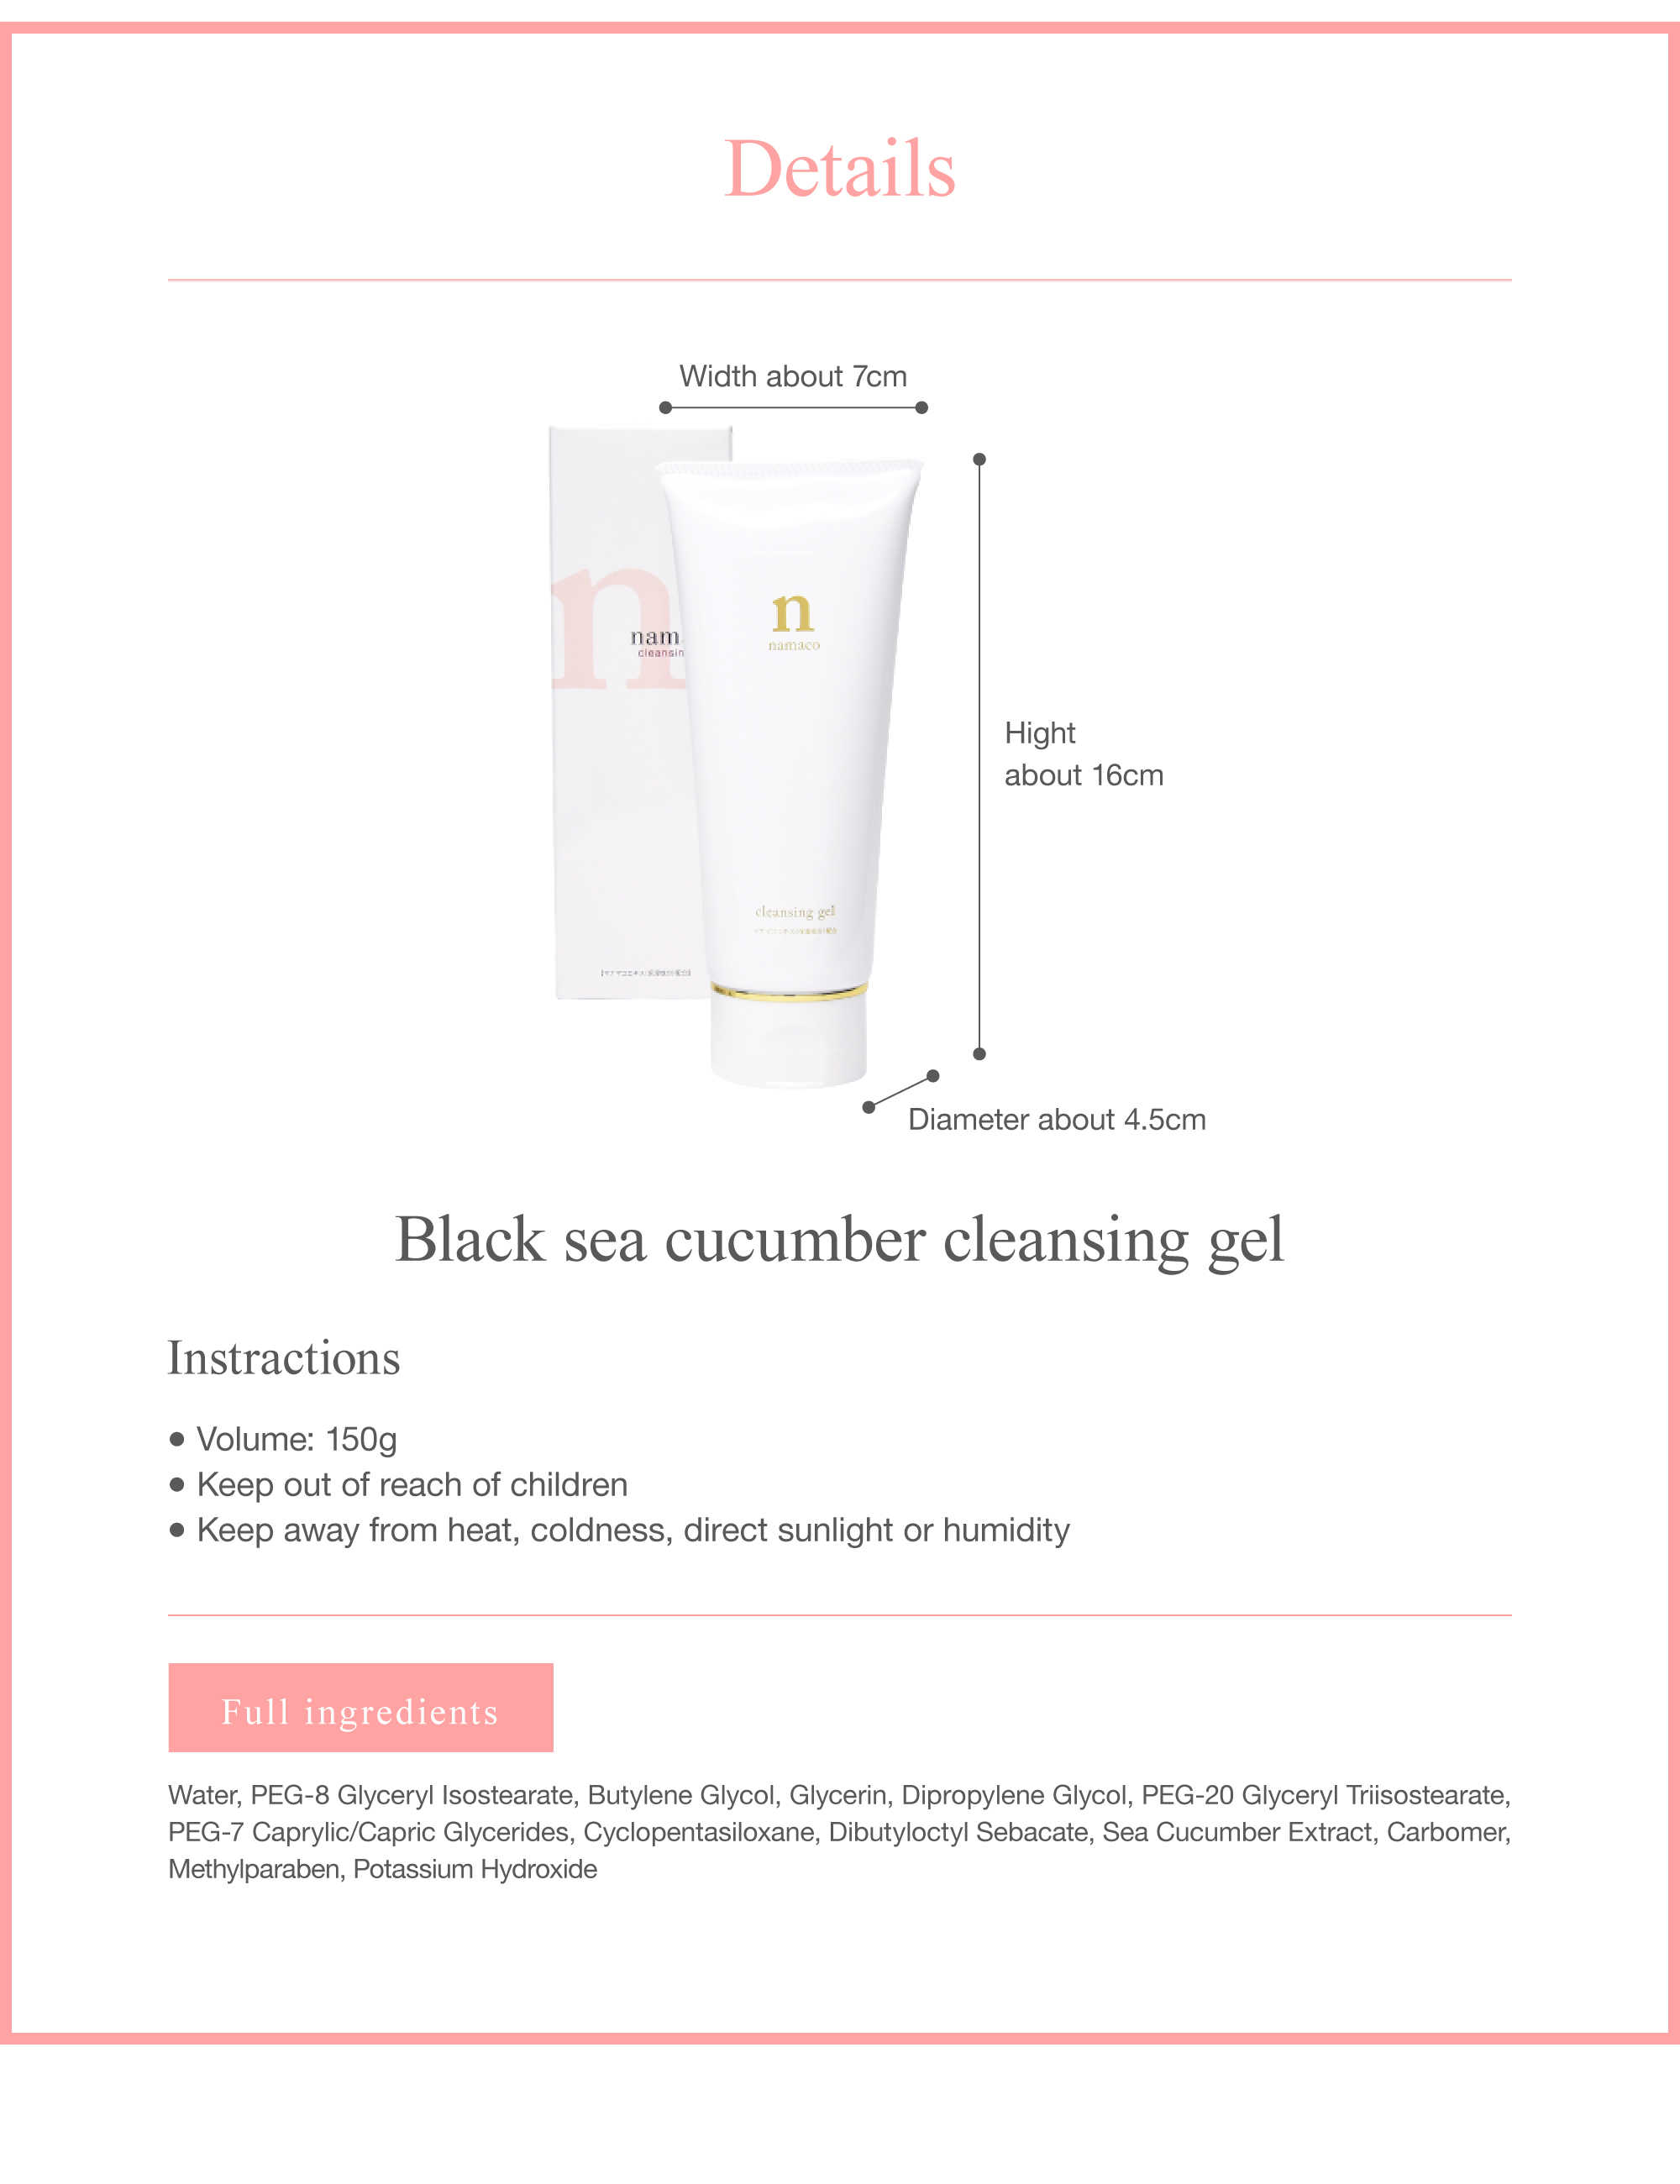 The dimensions of the black sea cucumber cleansing gel 150g are Hight about 16cm, Diameter about 4.5cm